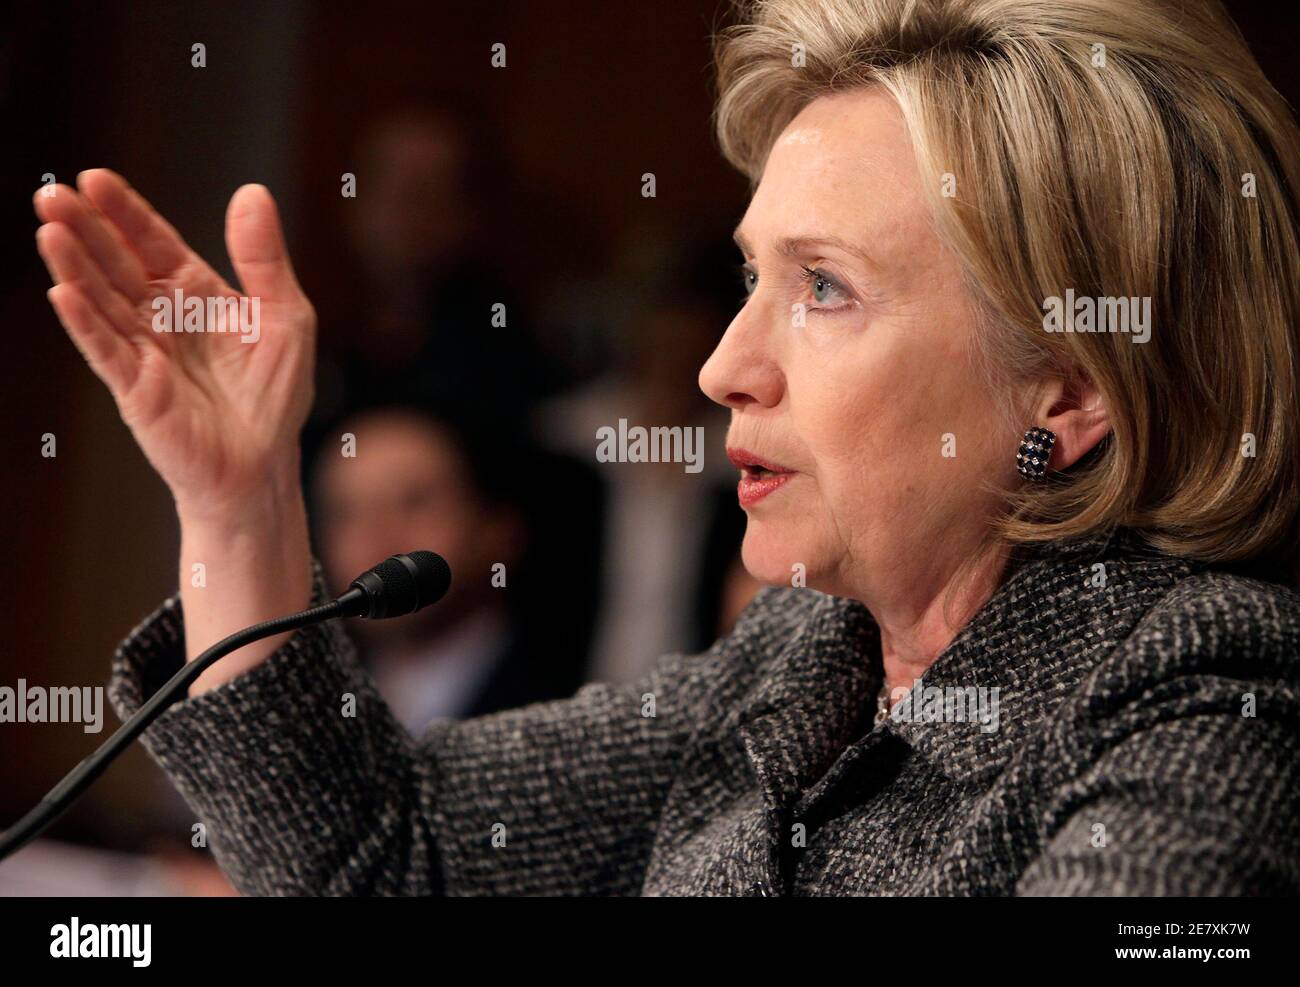 U.S. Secretary of State Hillary Clinton testifies before the Senate Foreign Relations Committee on Capitol Hill in Washington February 24, 2010. REUTERS/Yuri Gripas (UNITED STATES - Tags: POLITICS) Stock Photo